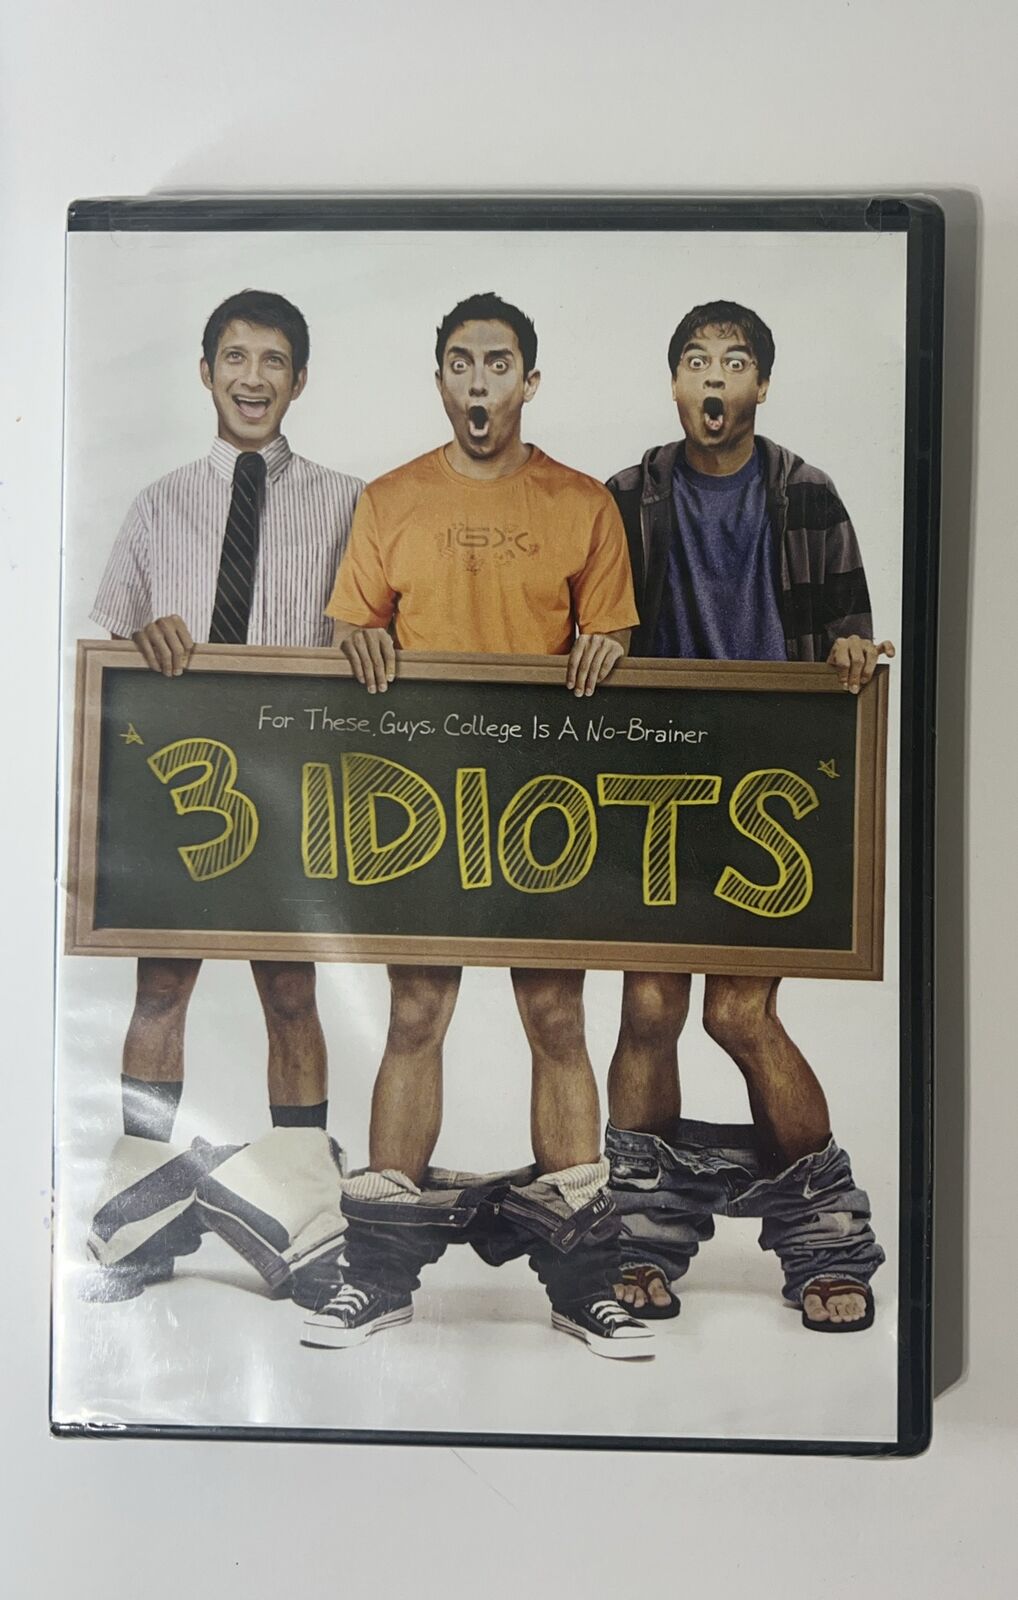 abhay bhalla recommends The Idiots Movie Online